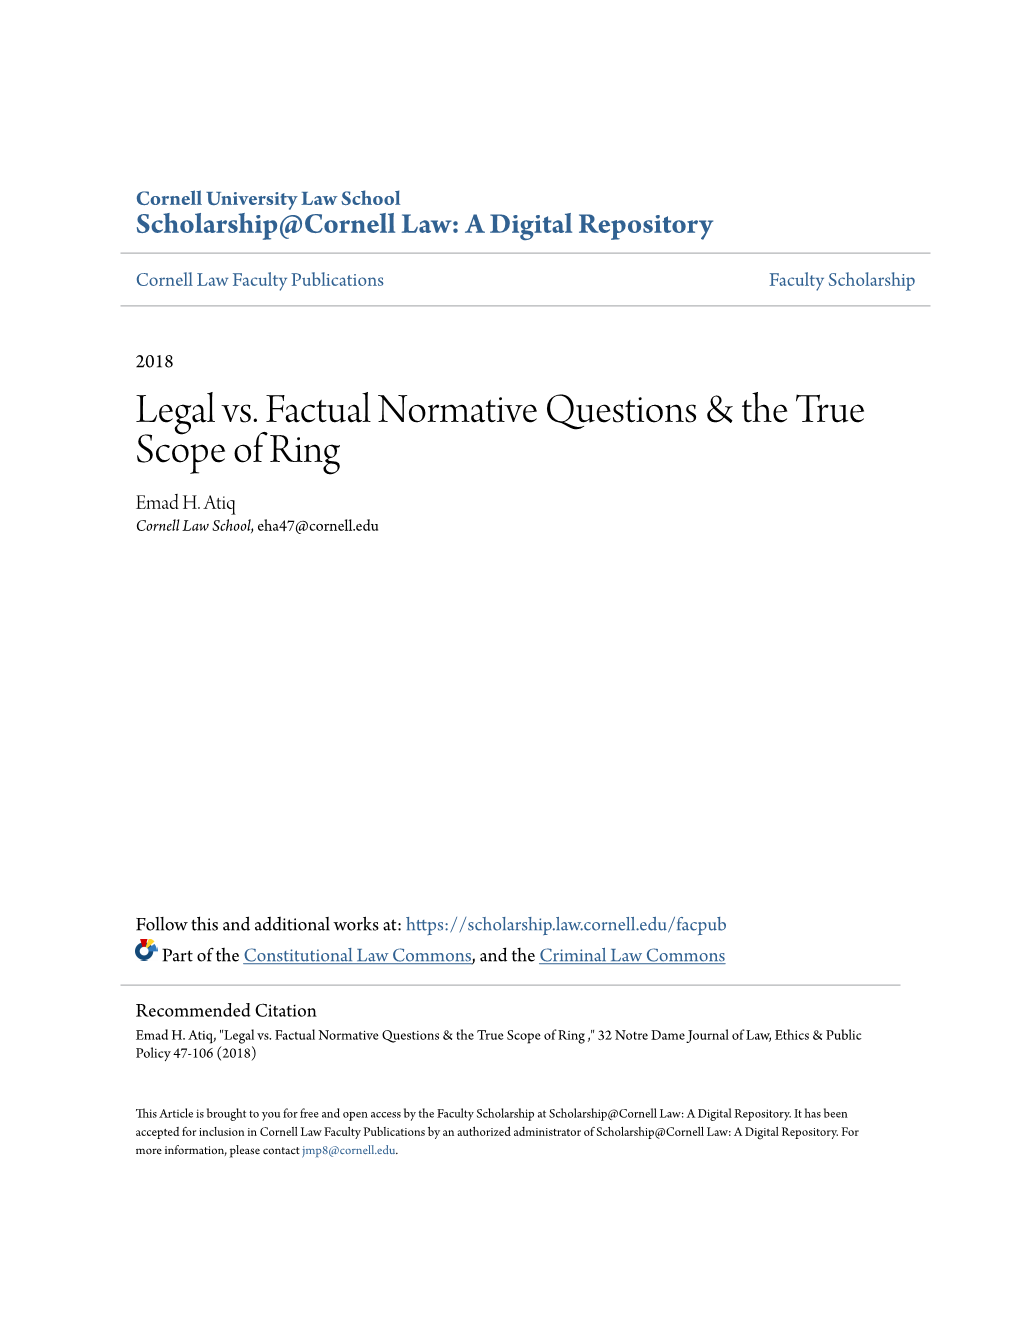 Legal Vs. Factual Normative Questions & the True Scope of Ring